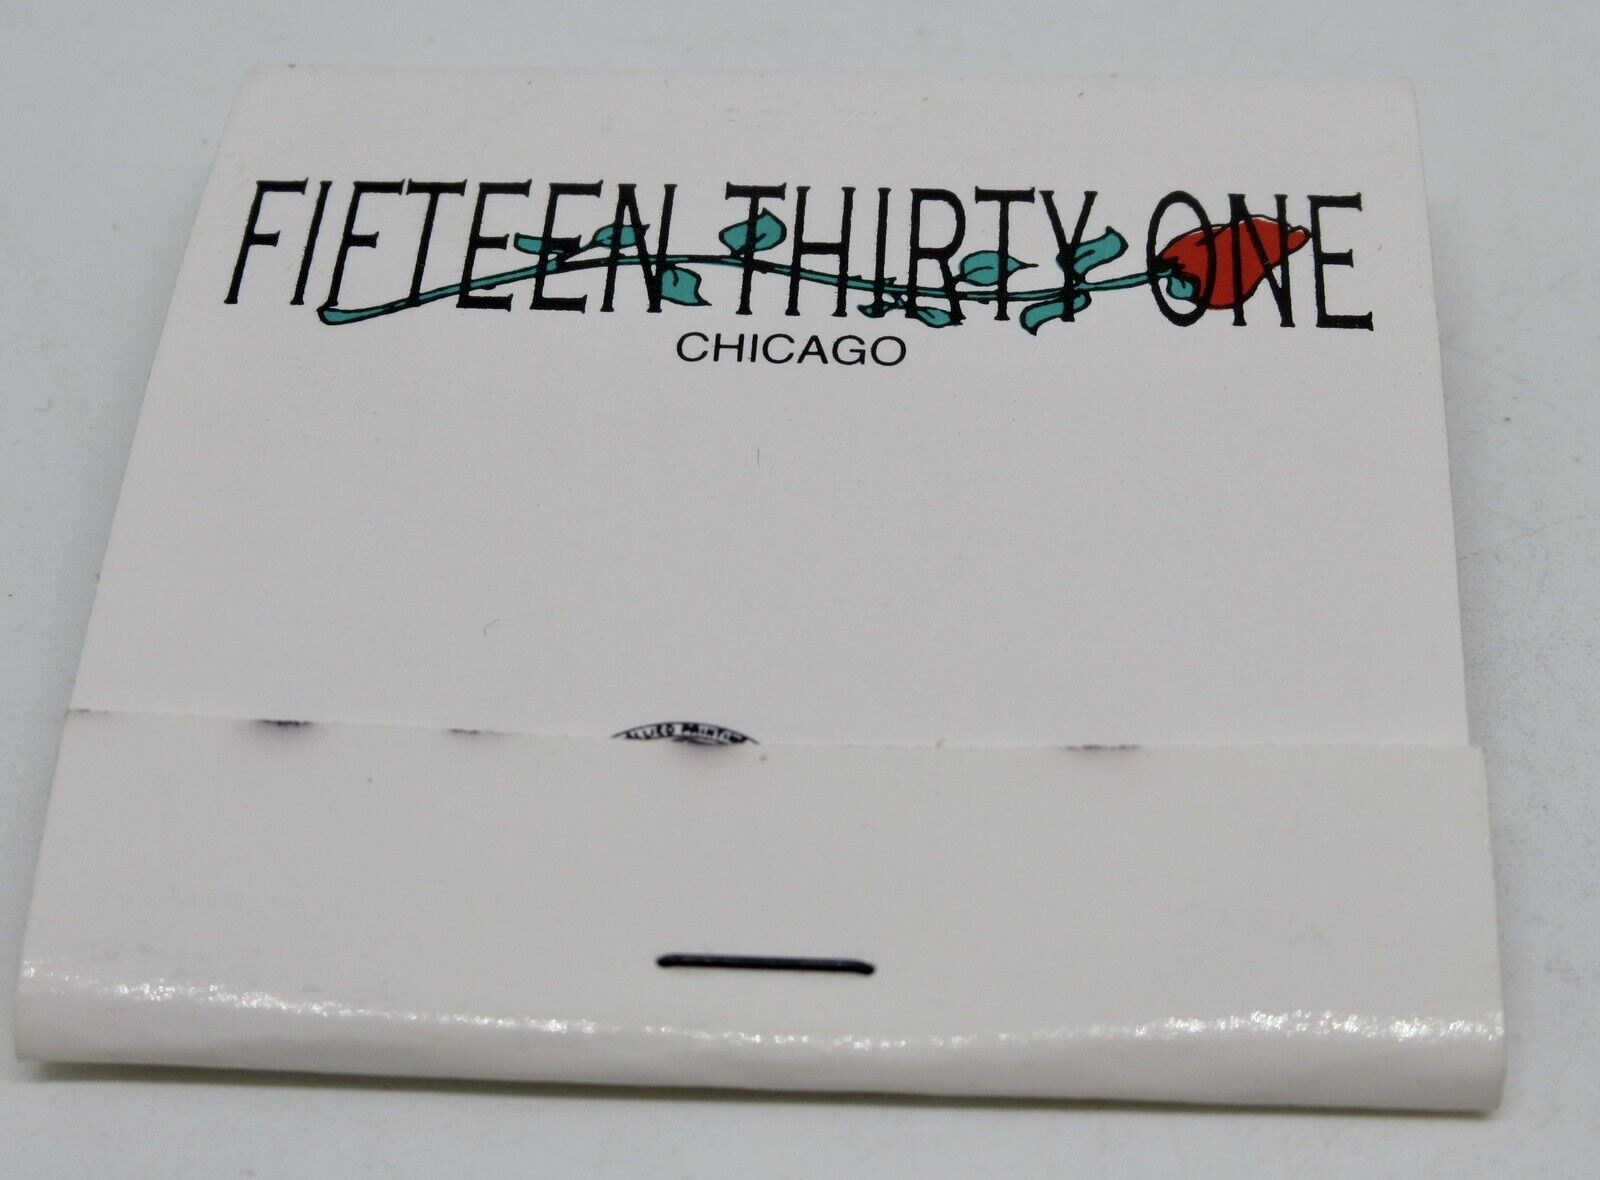 Fifteen Thirty One Club 1531 N. Kingsbury St Chicago Illinois FULL Matchbook